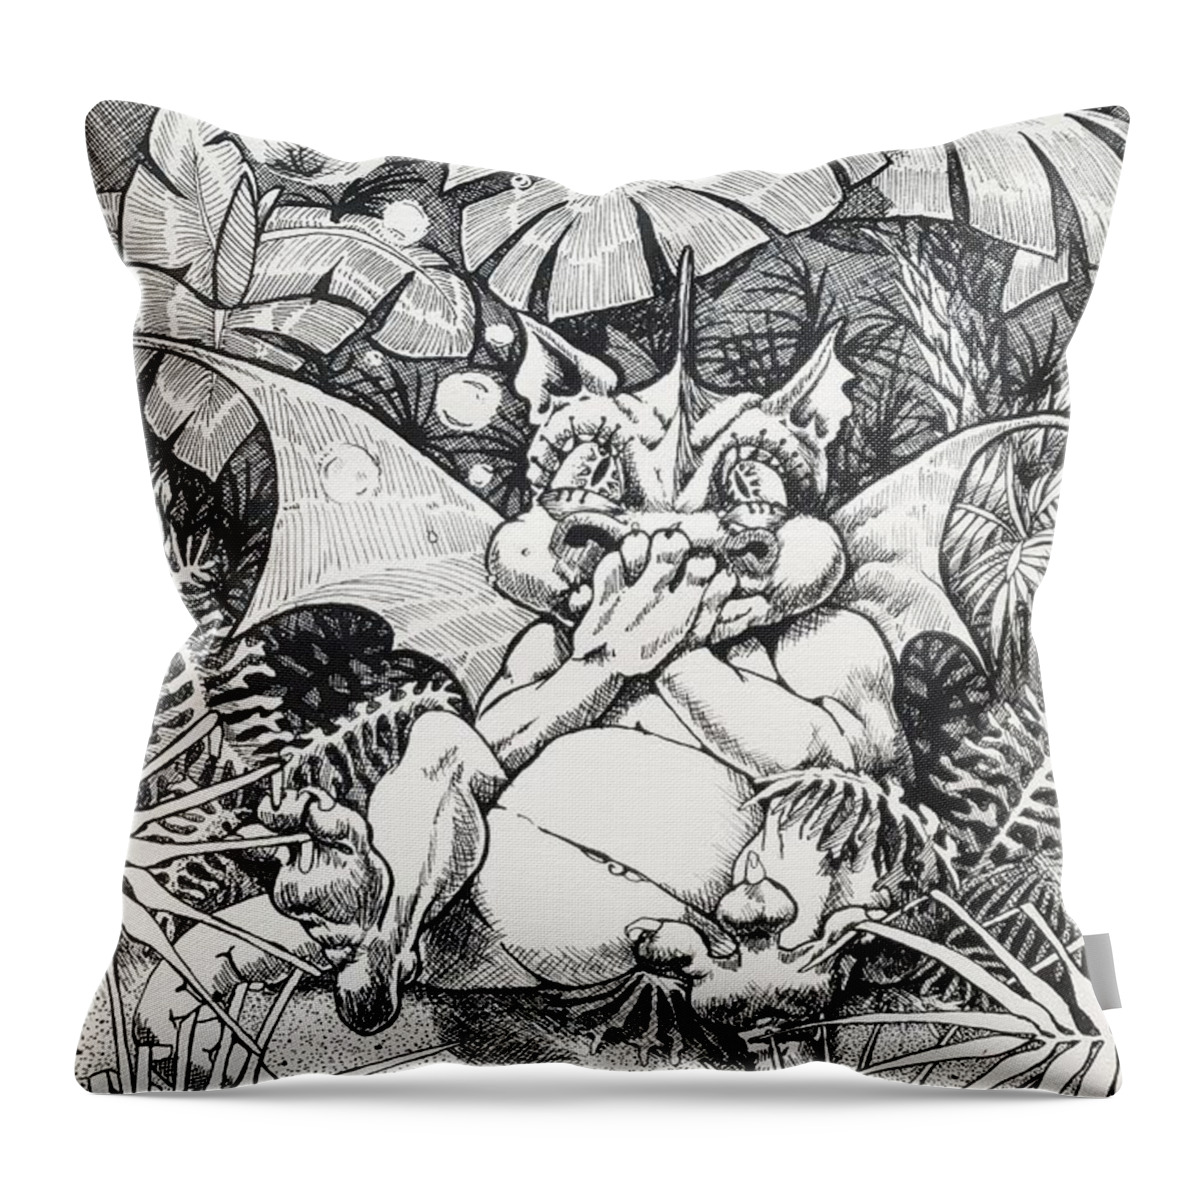 Dragon Throw Pillow featuring the drawing Burping Dragon by Merana Cadorette